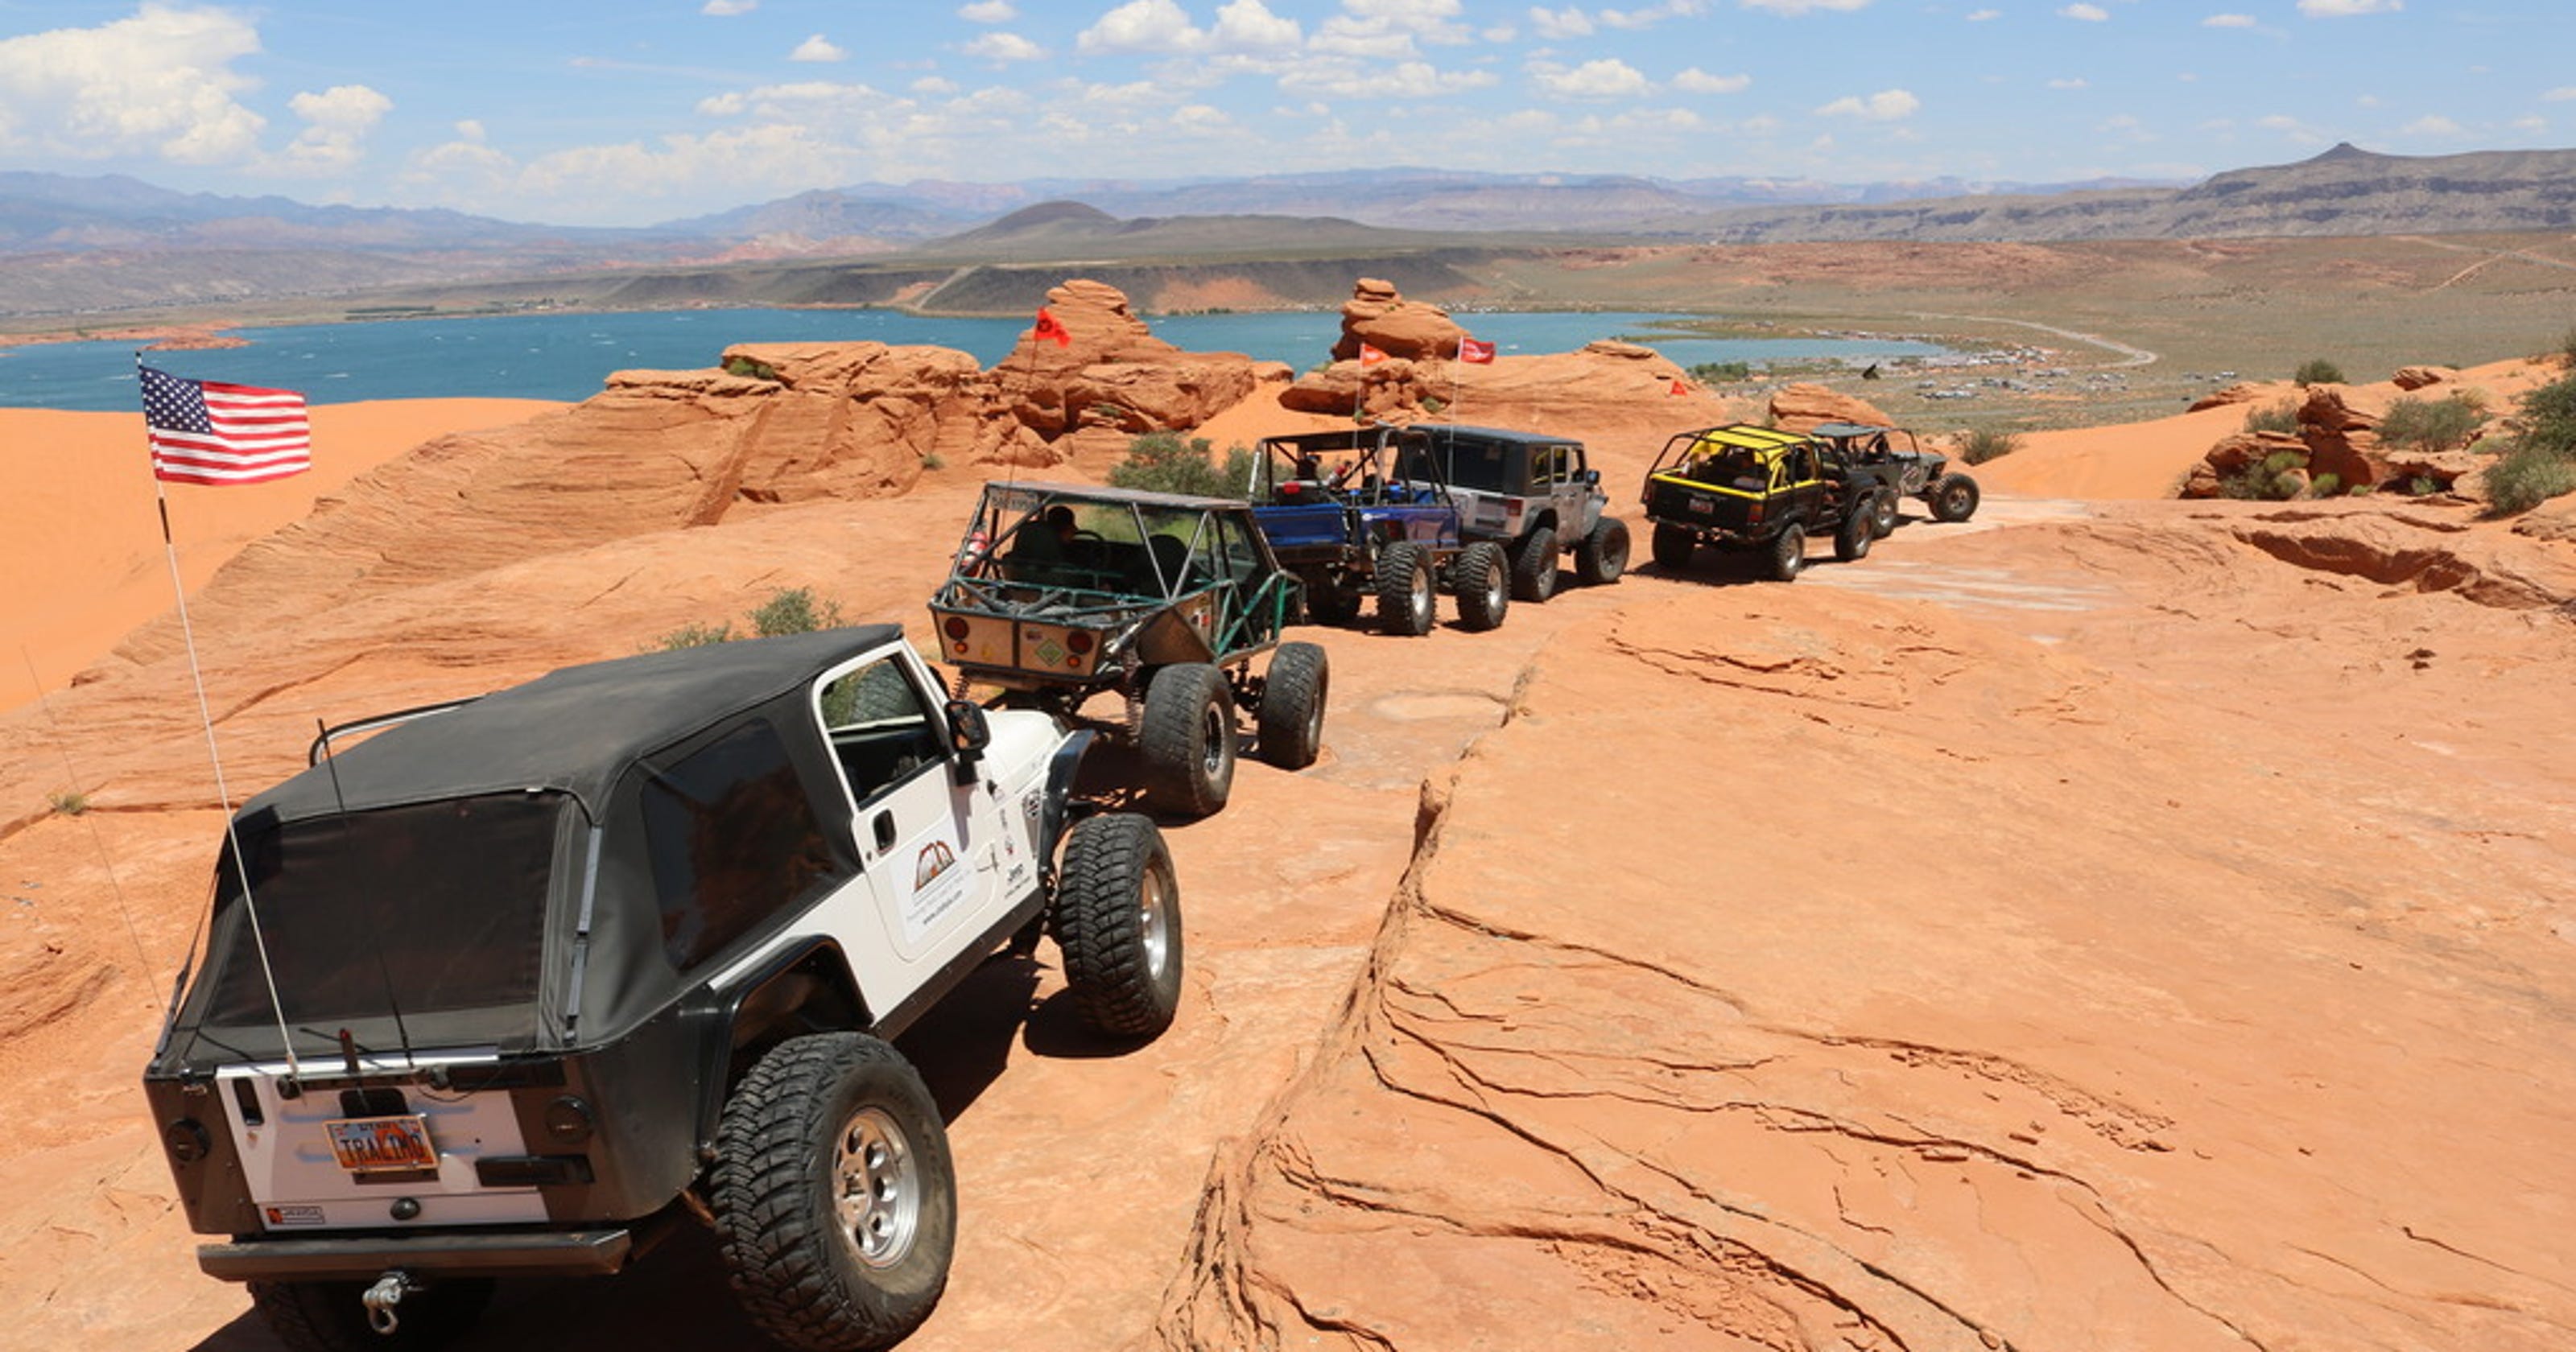 'Trail Hero' coming back to Sand Hollow for So. Utah offroad event